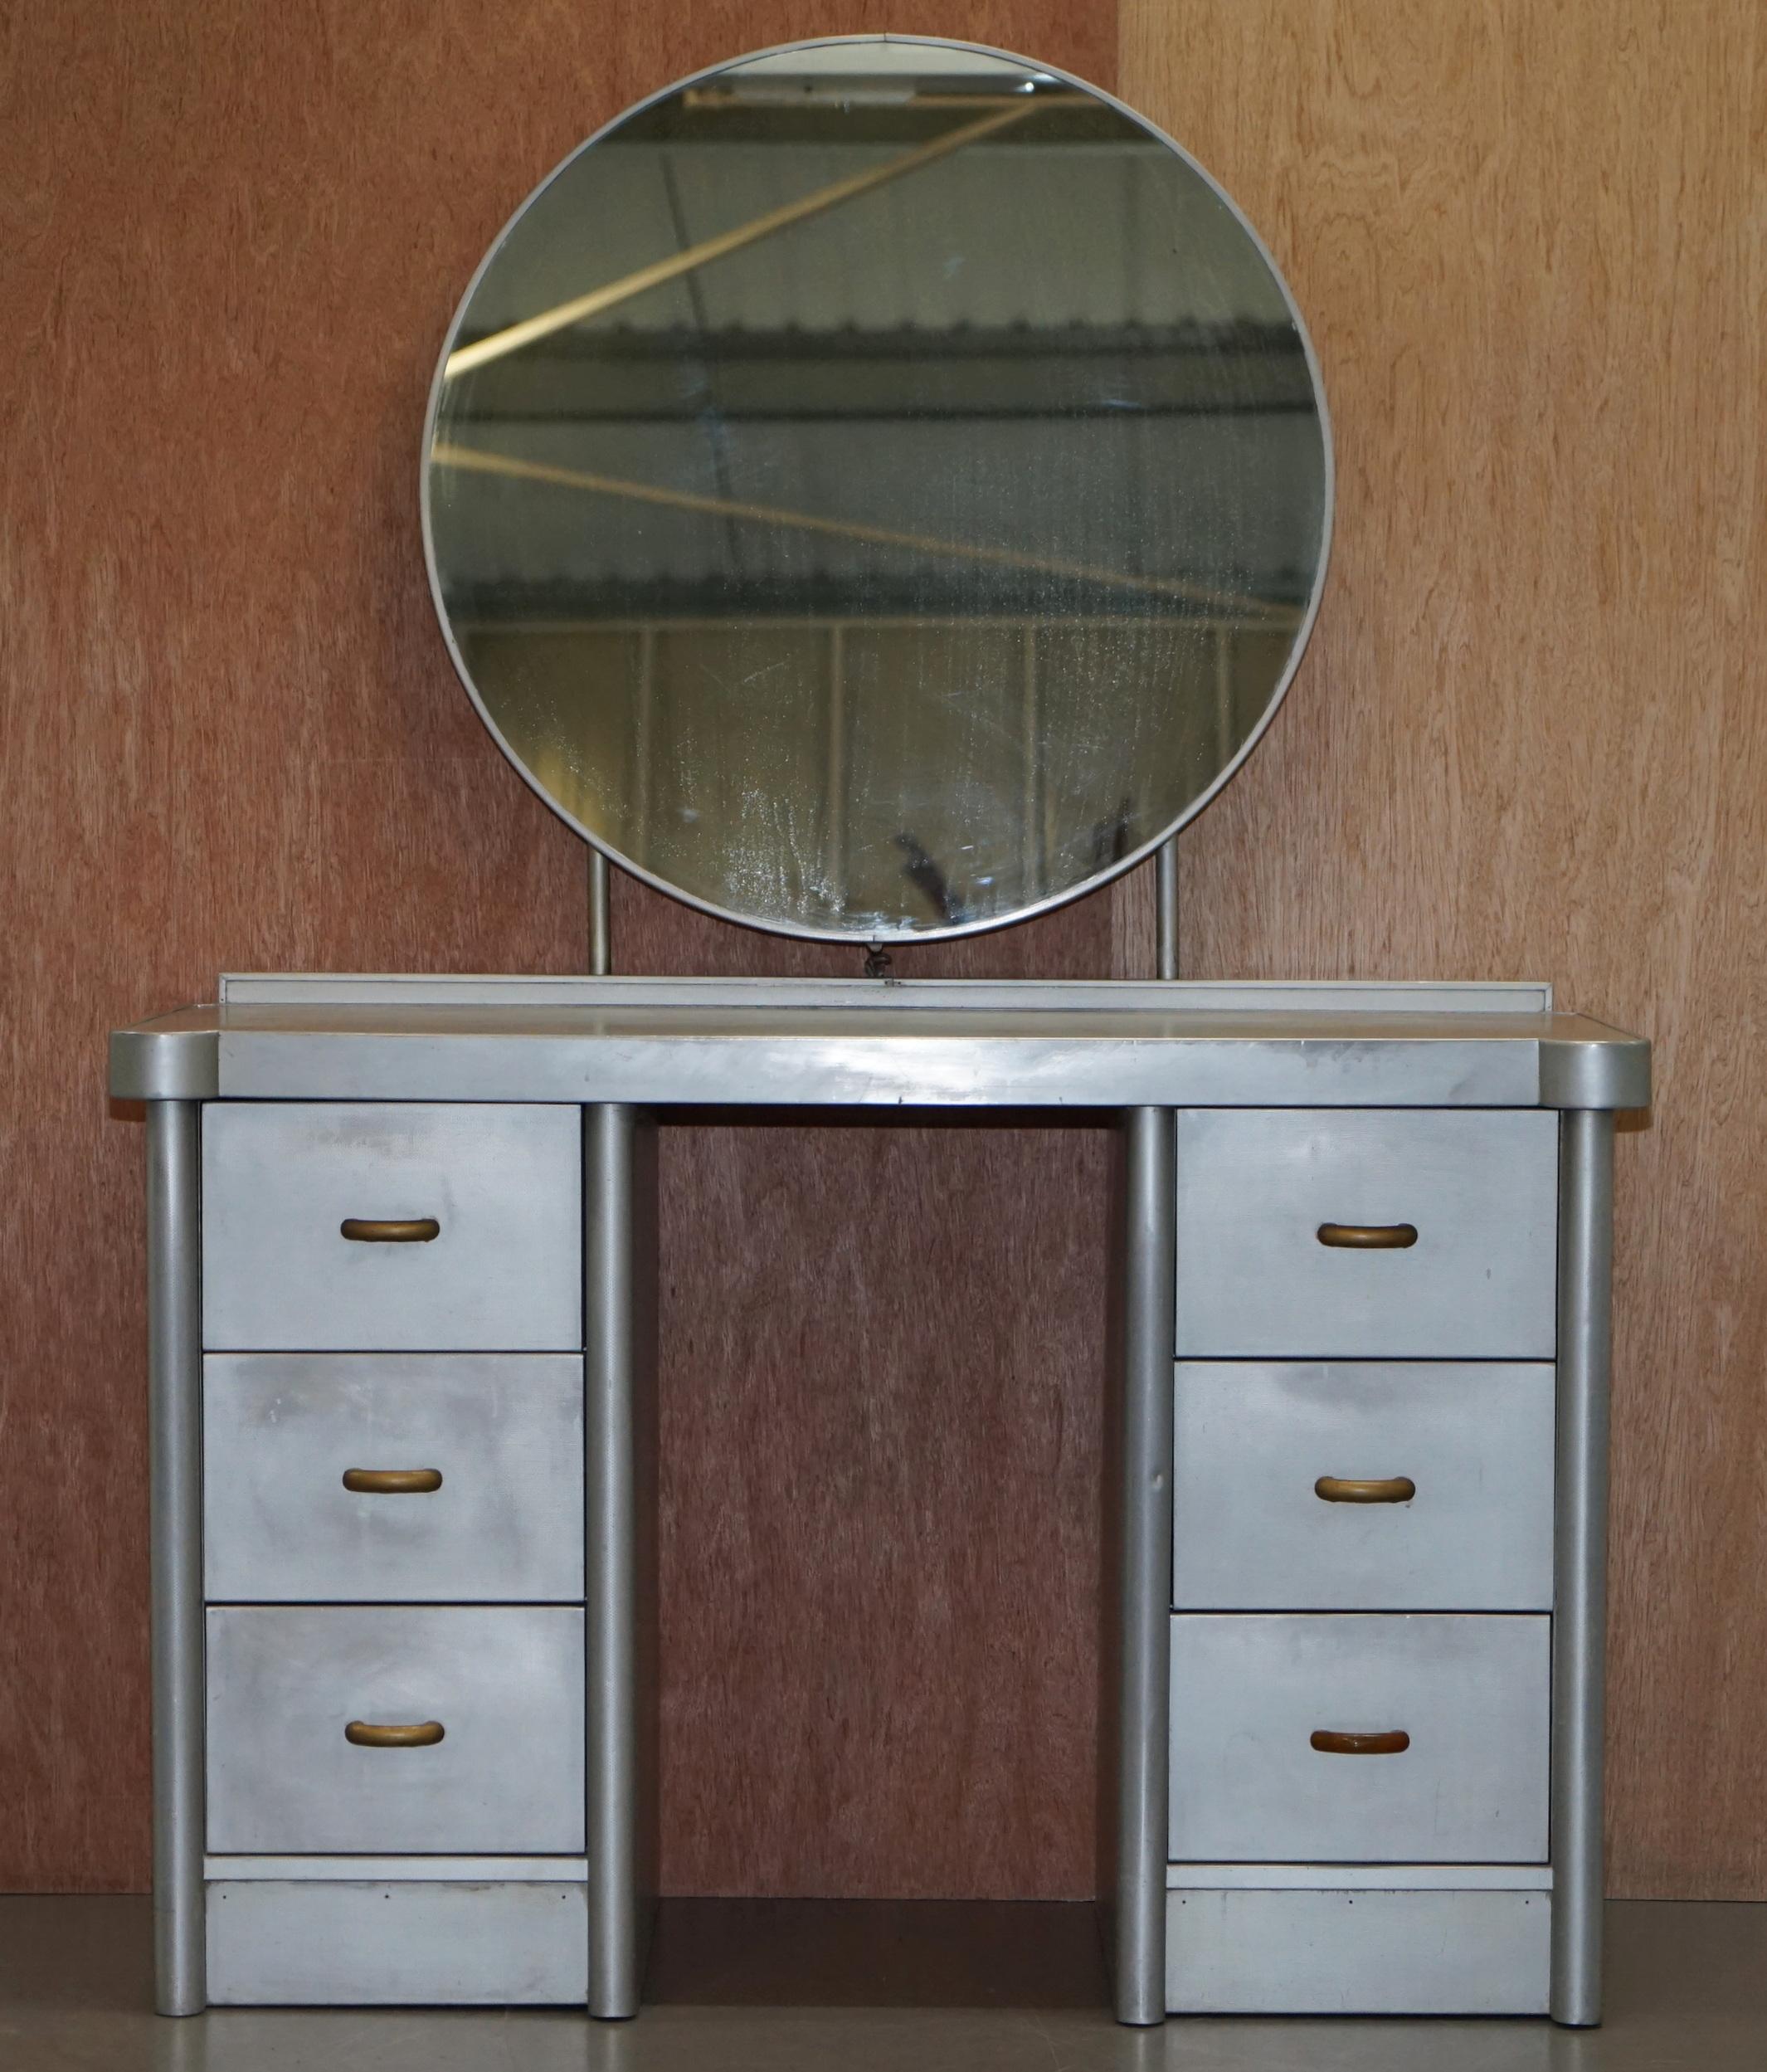 We are delighted to this stunning original Huntington Aviation Art Deco aluminum dressing table and mirror

This piece is part of a suite, I have in total a bedside table, a tall boy cupboard, the head and foot bed boards, a large double wardrobe